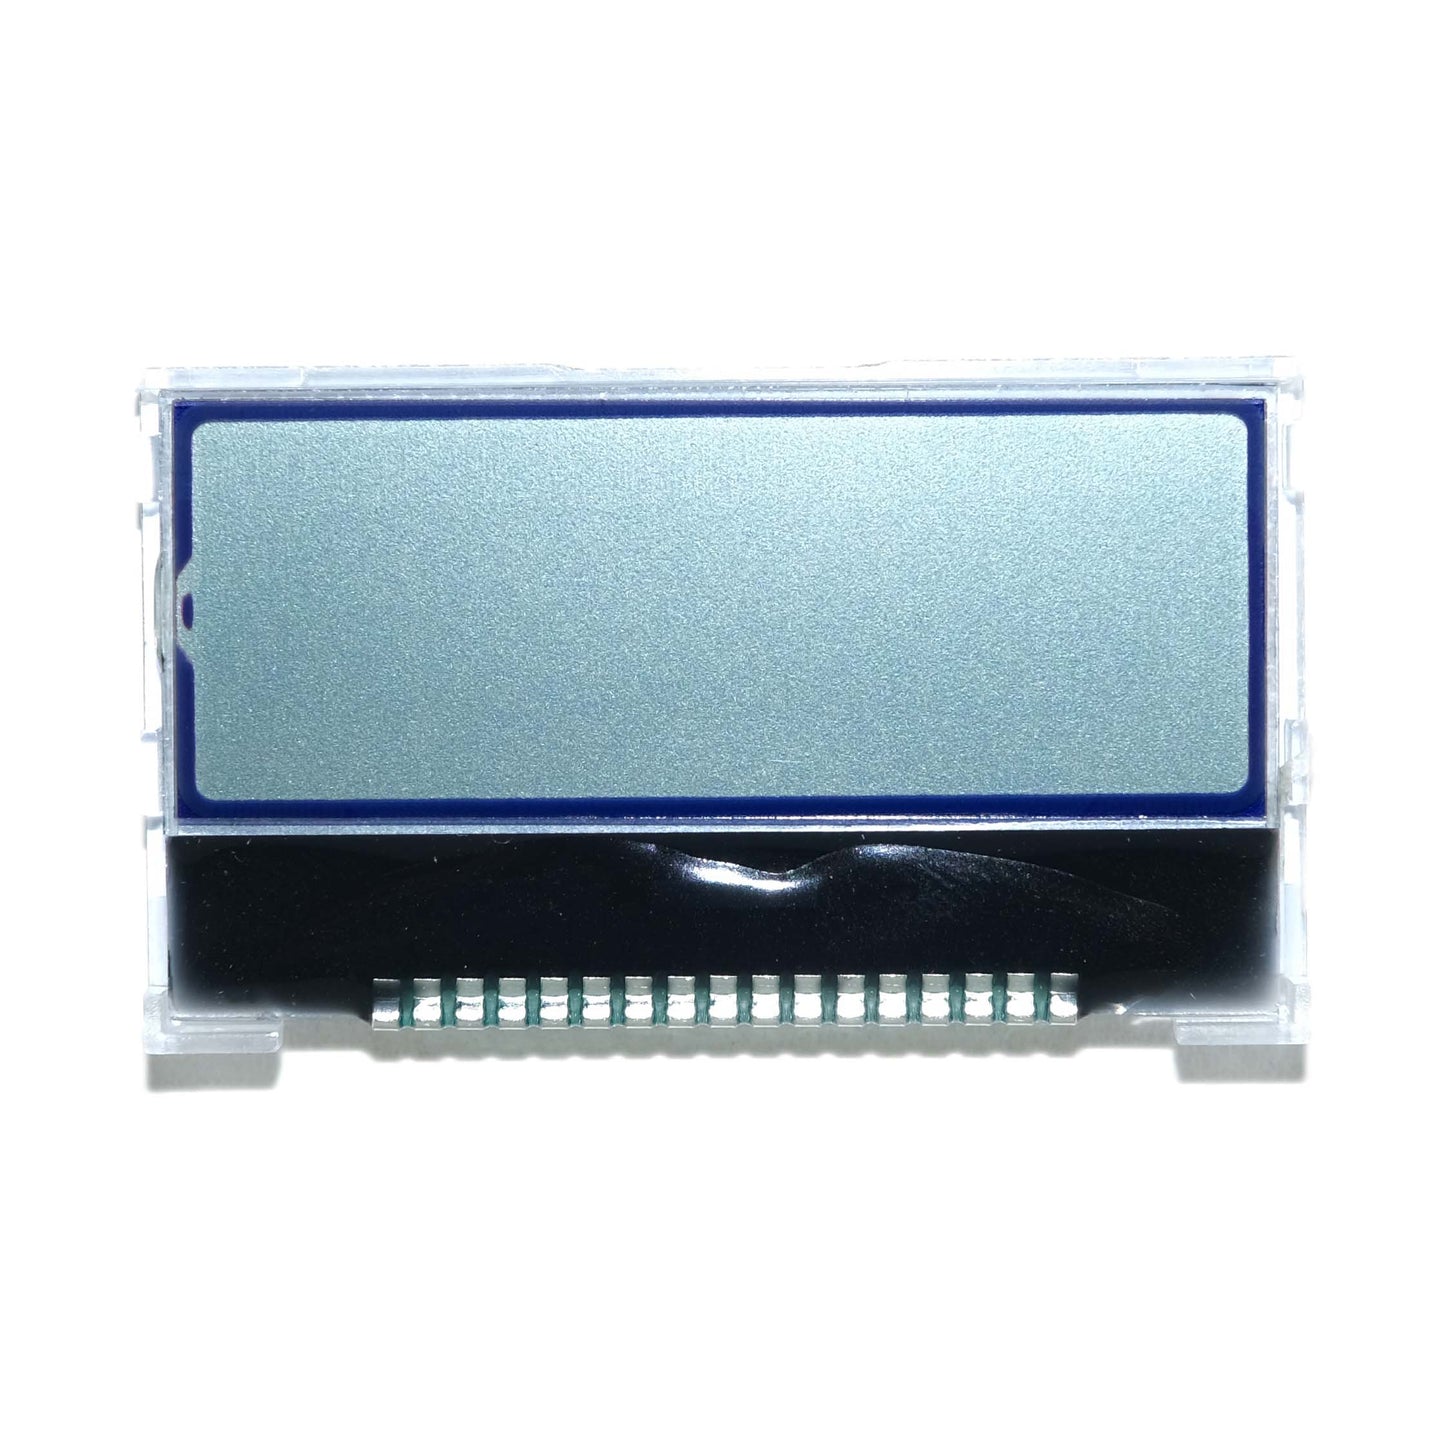 128x32 pixels COG (Chip-On-Glass) LCD Graphic Display, interfaced with SPI